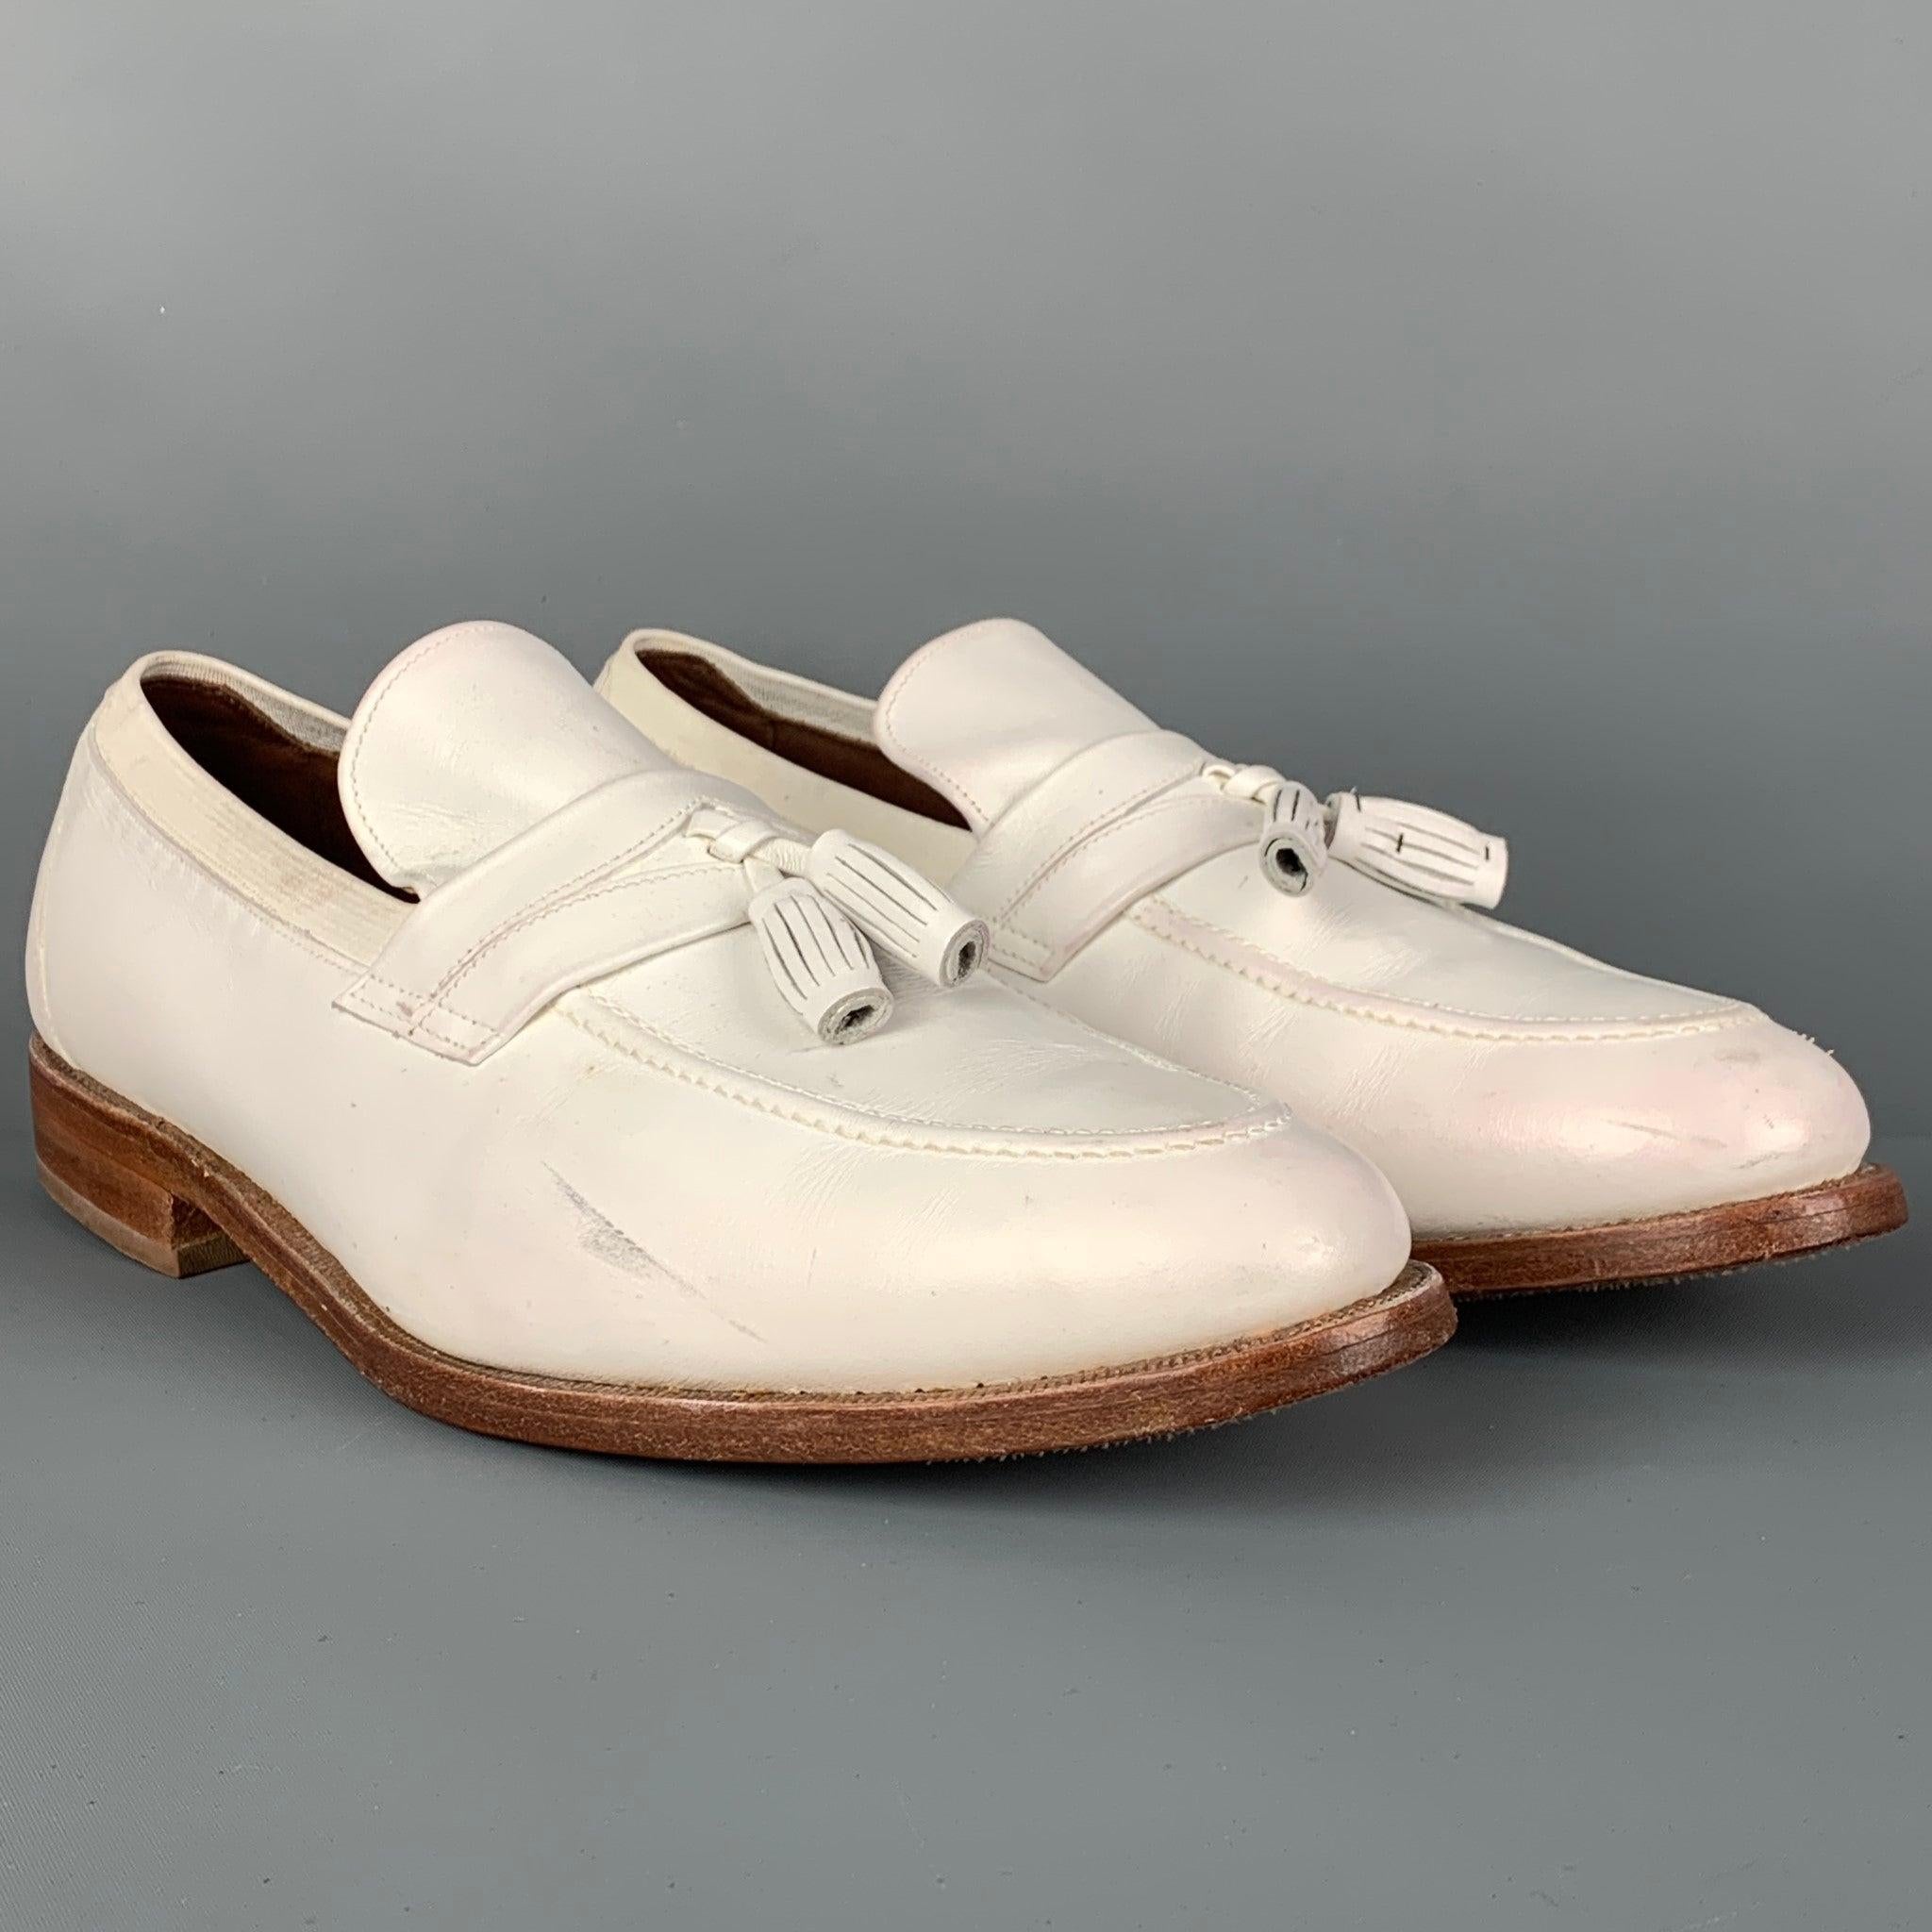 ALLEN EDMONDS loafers comes in a white leather featuring front tassels and a slip on style. Made in USA. Good
Pre-Owned Condition. Moderate wear throughout.  

Marked:   10.5 / 30641 4 Outsole: 12.5 inches  x 4.5 inches 
  
  
 
Reference: